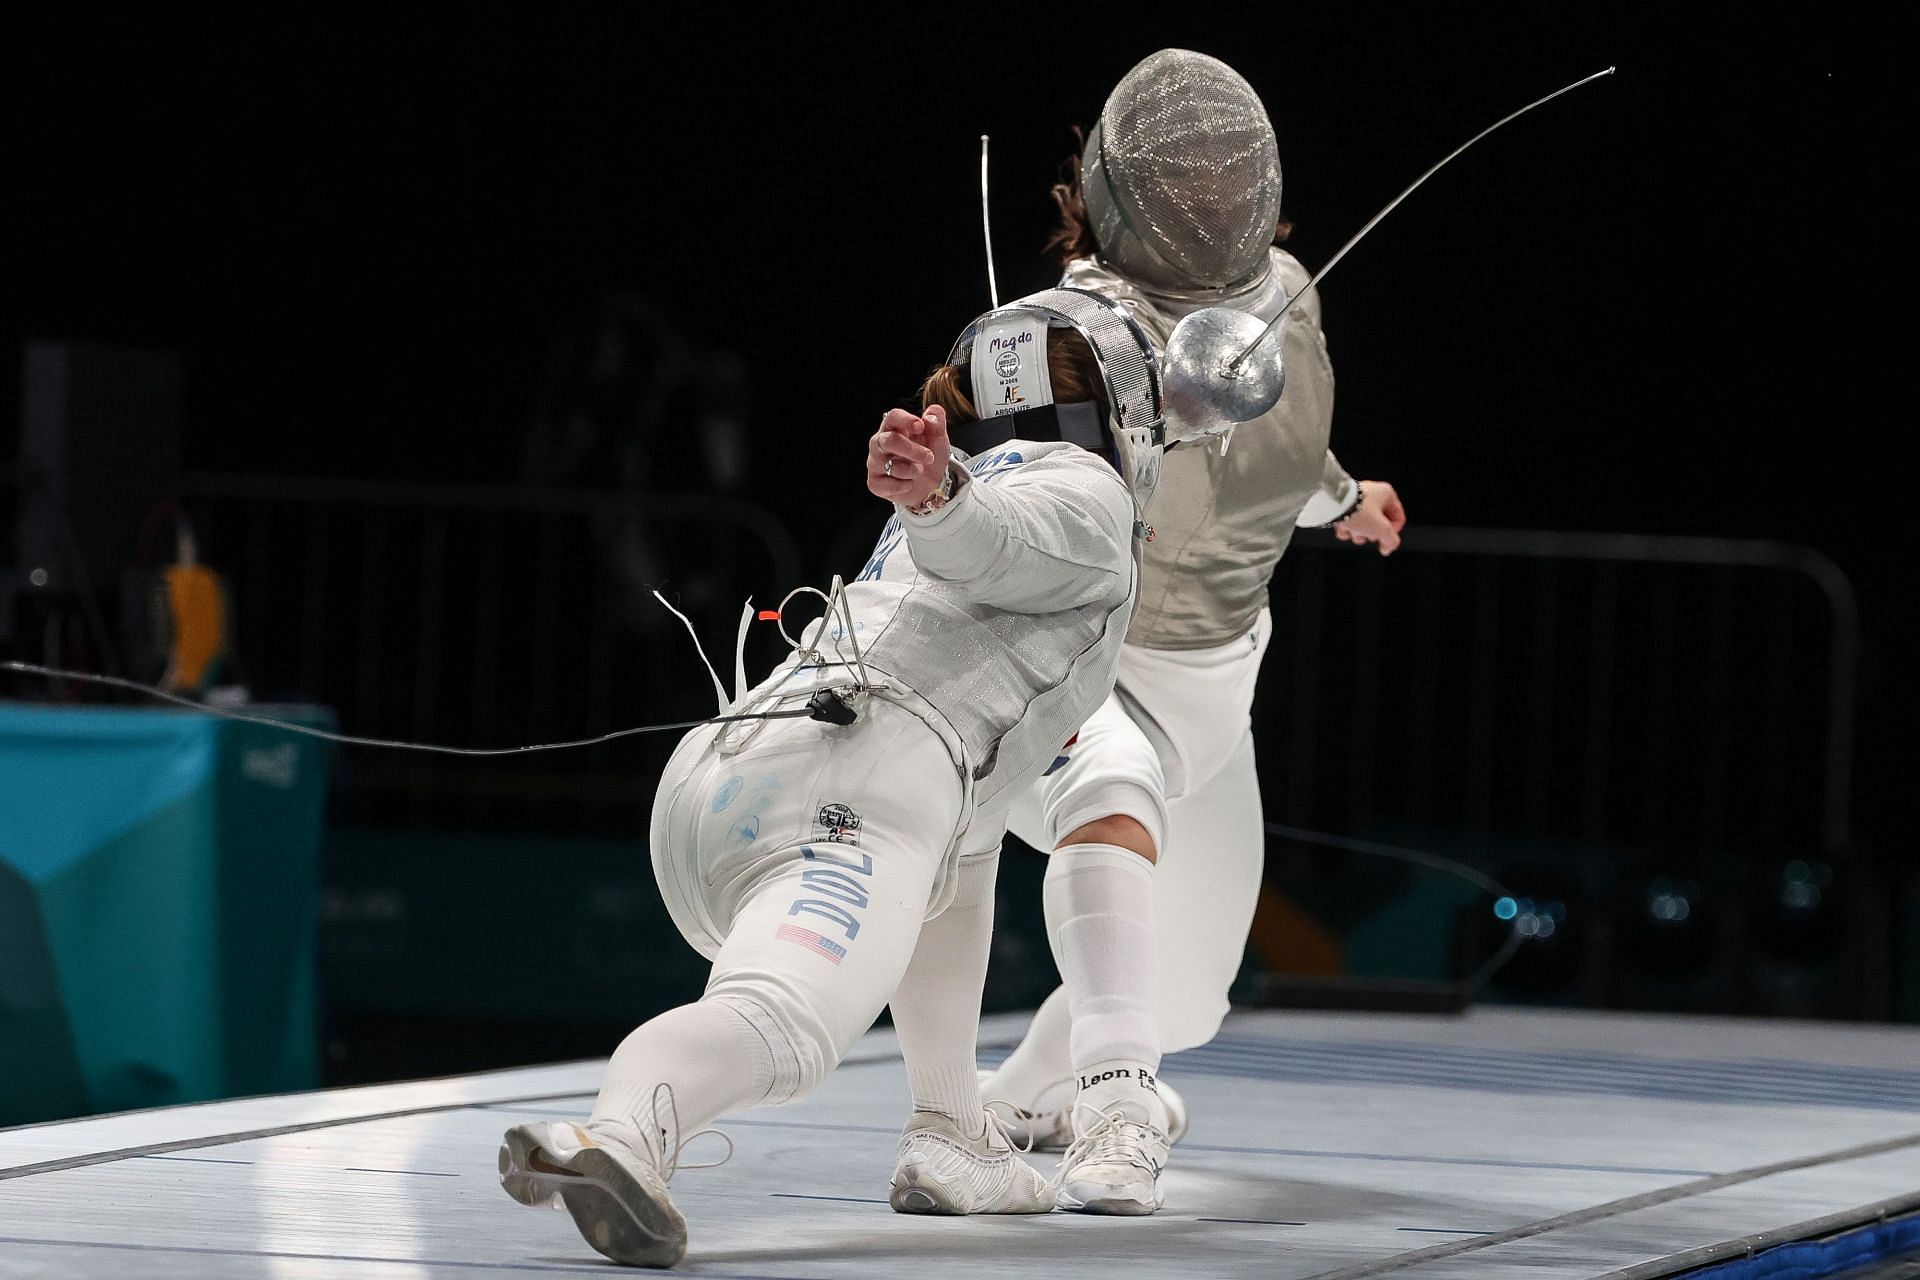 Magda Skarbonkiewicz competes against Maia Chamberlain during the Fencing - Women&rsquo;s Sabre Individual Final at the 2023 Pan Am Game in Santiago, Chile.